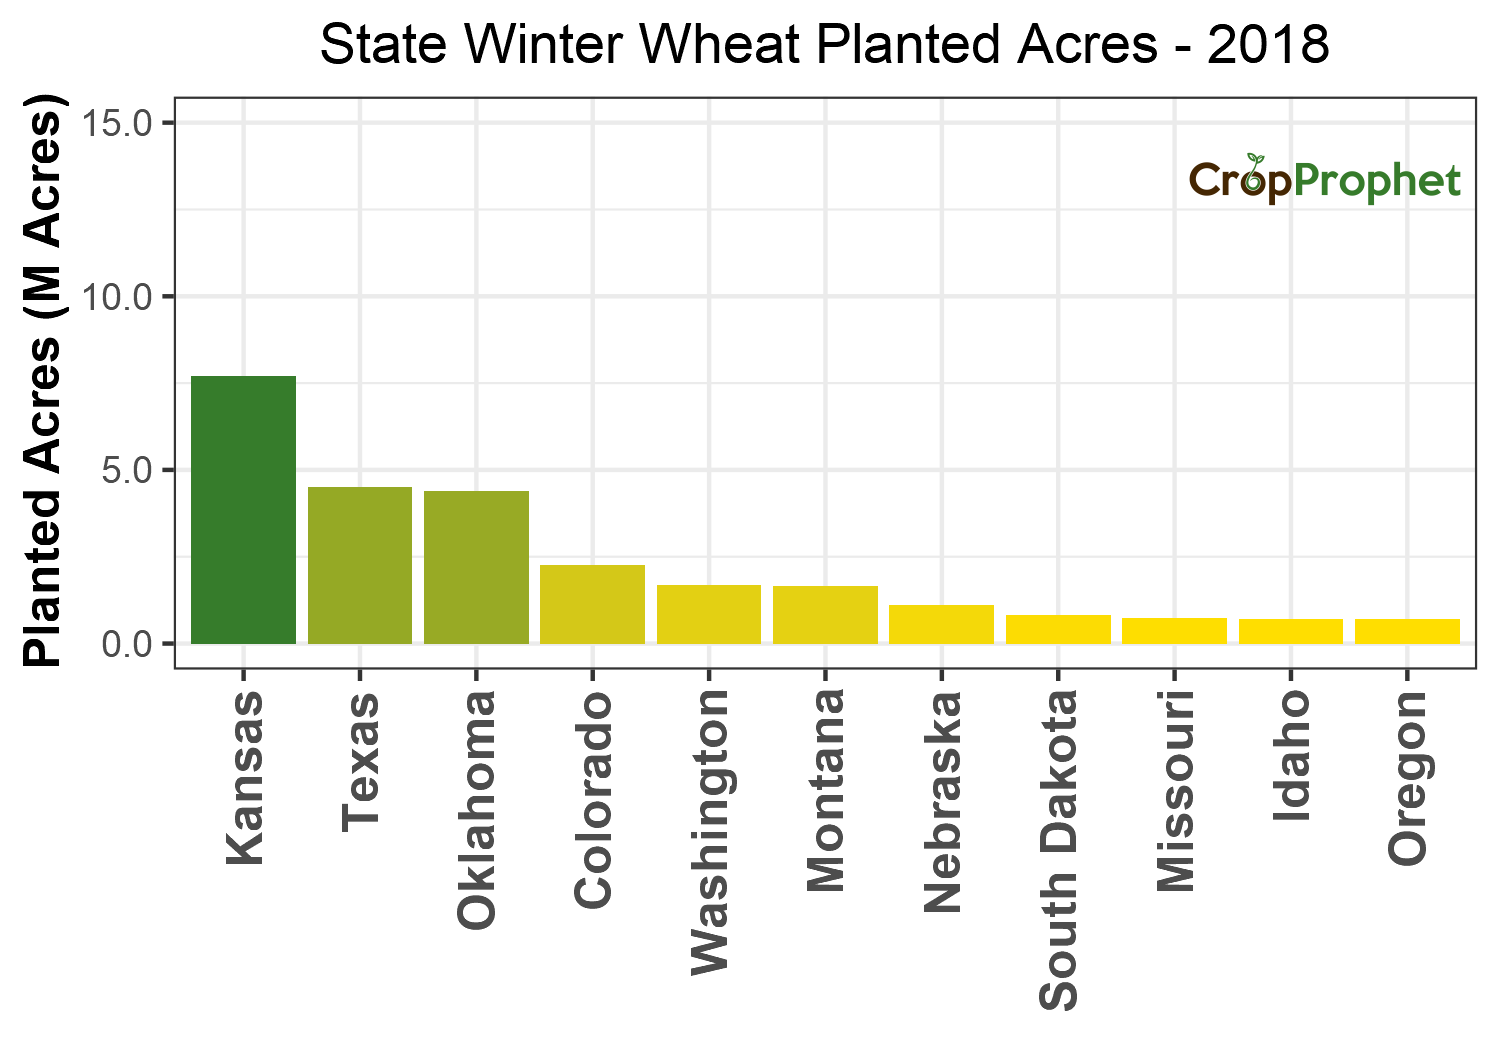 Winter wheat Production by State - 2018 Rankings